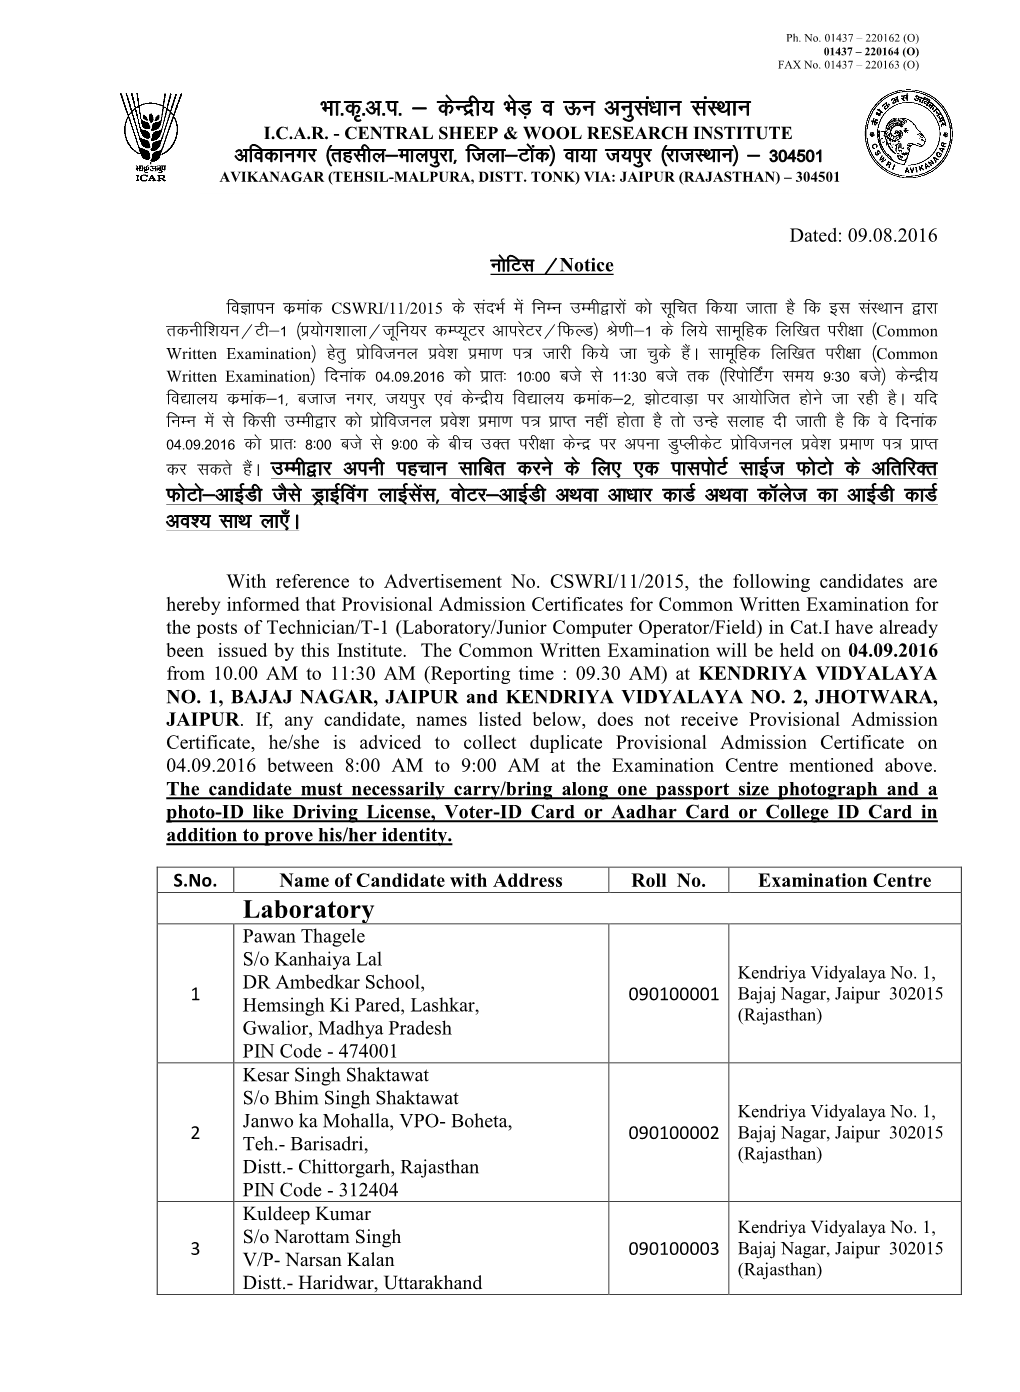 List of Eligible Condidates for Common Written Examination for the Post of Technician